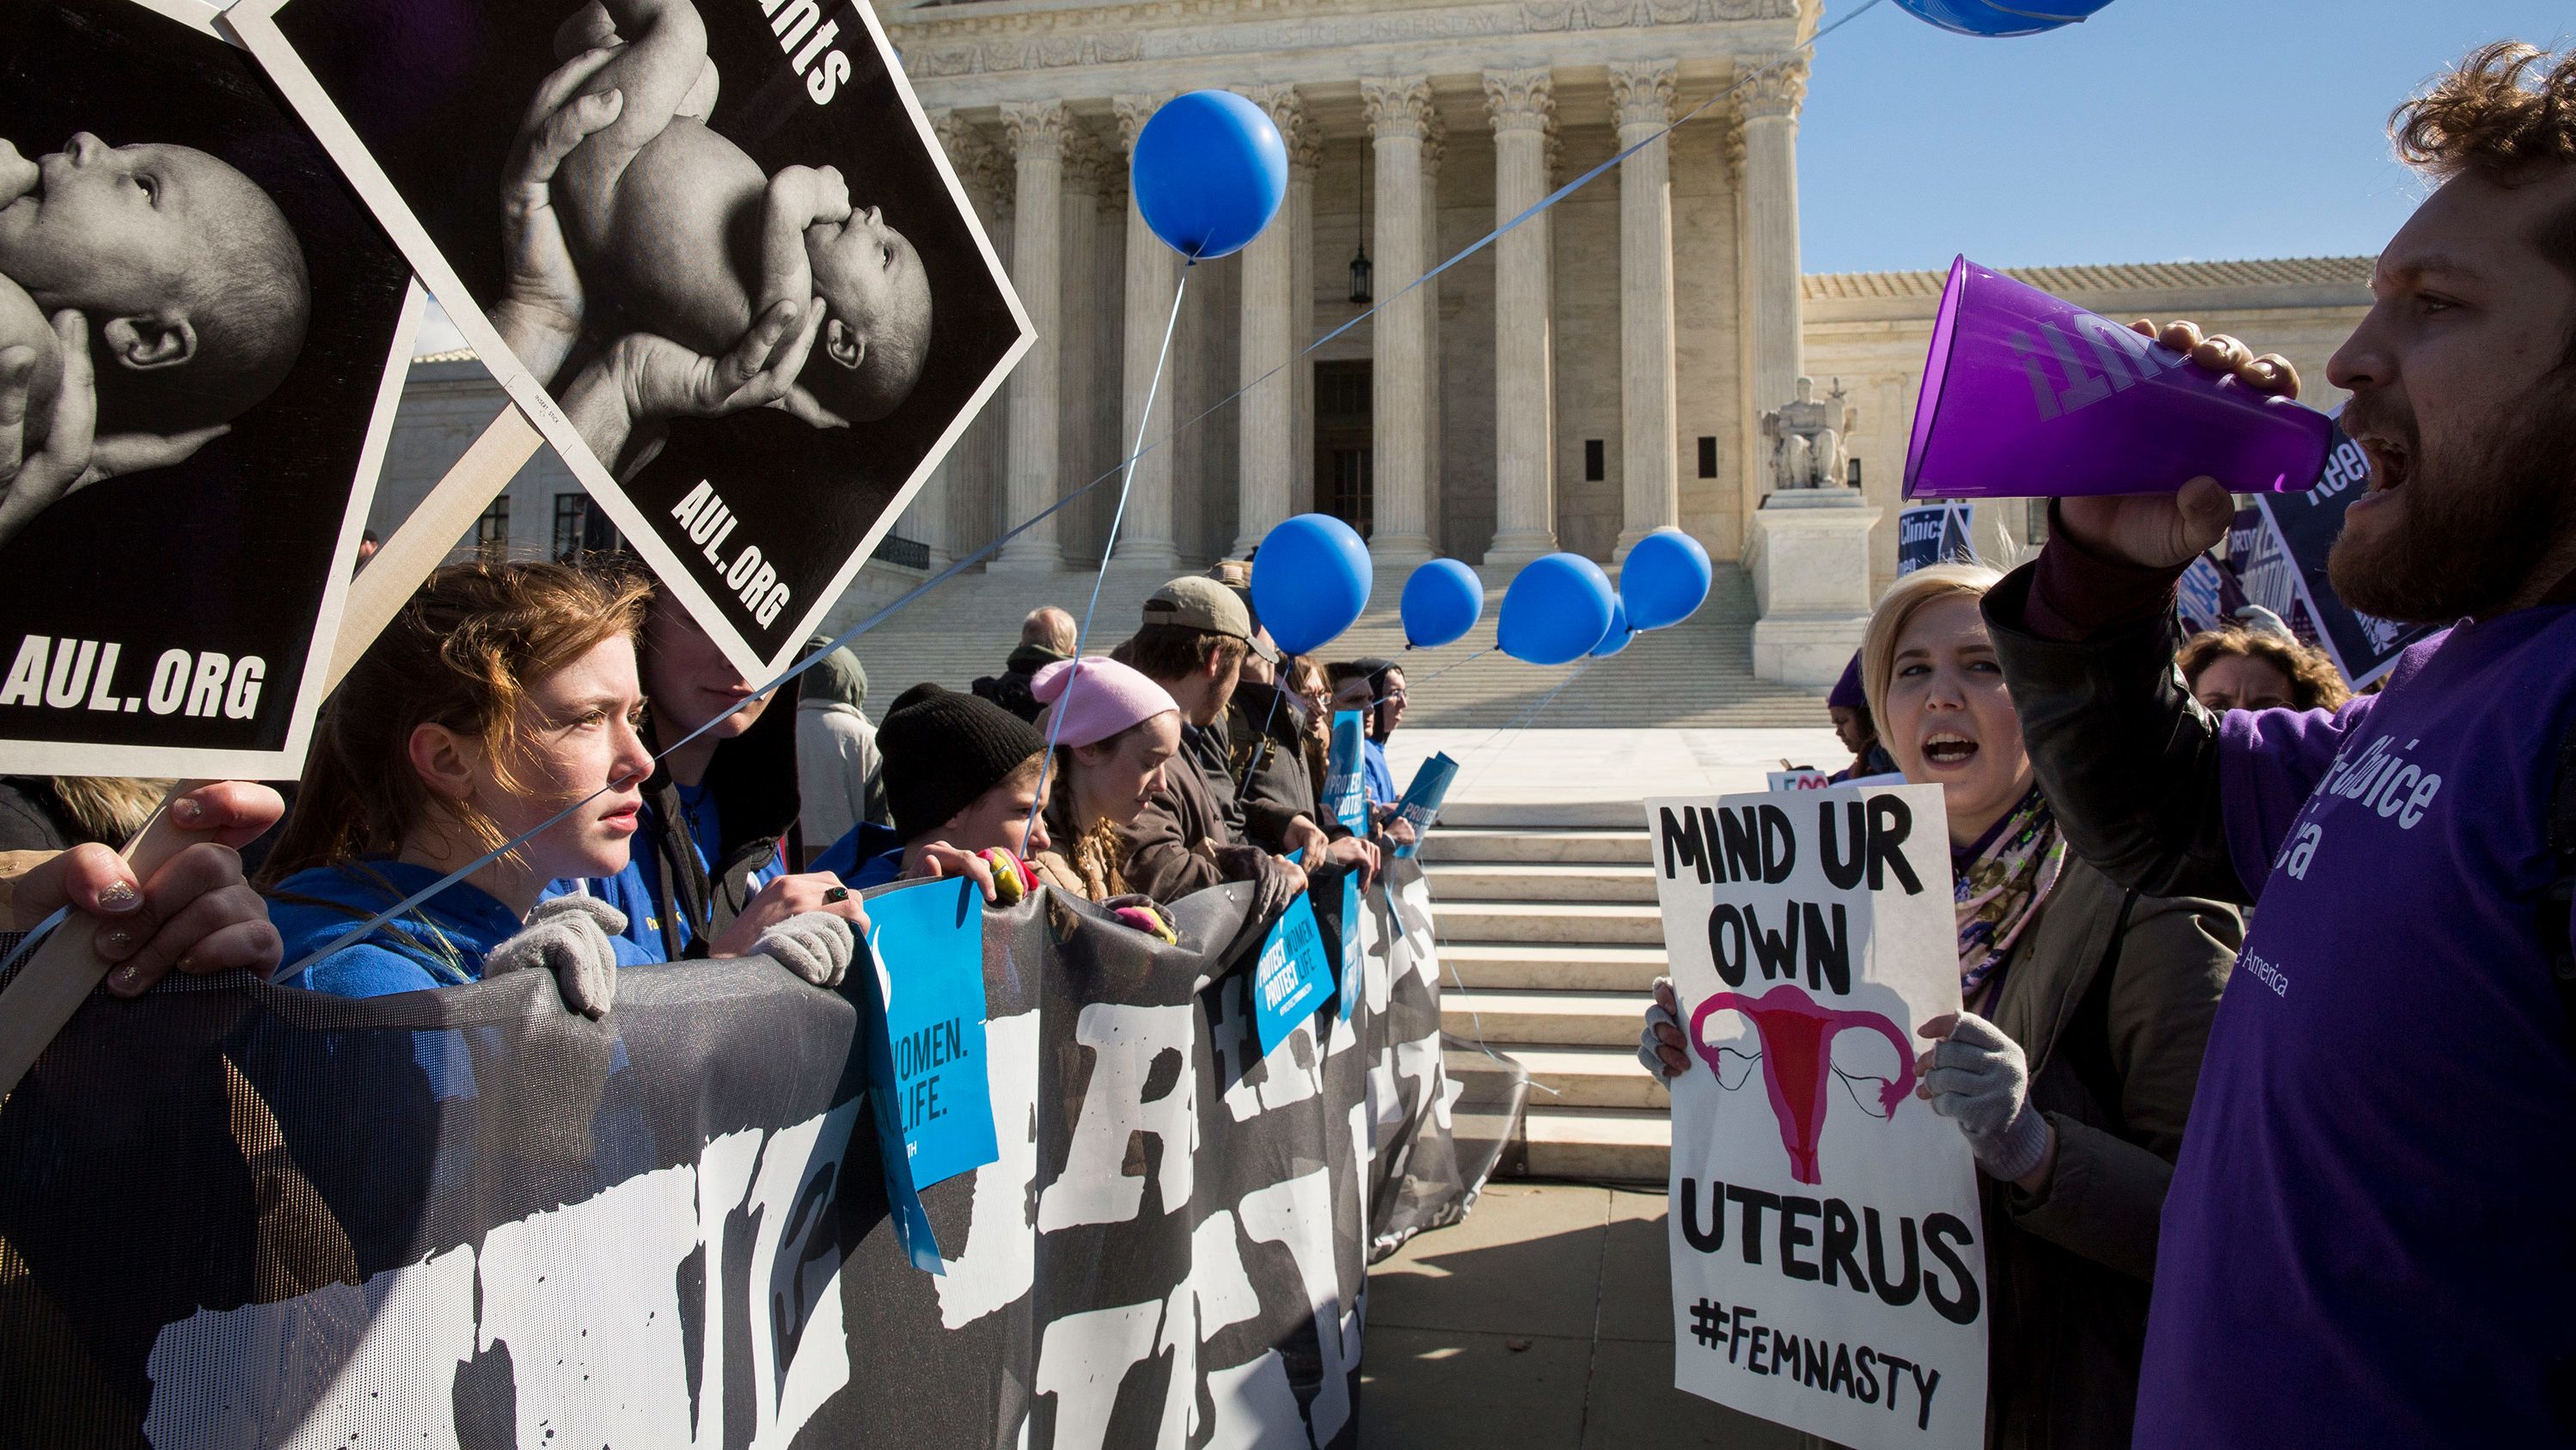 Pro-choice advocates clash with anti-abortion advocates outside the Supreme Court in 2016.